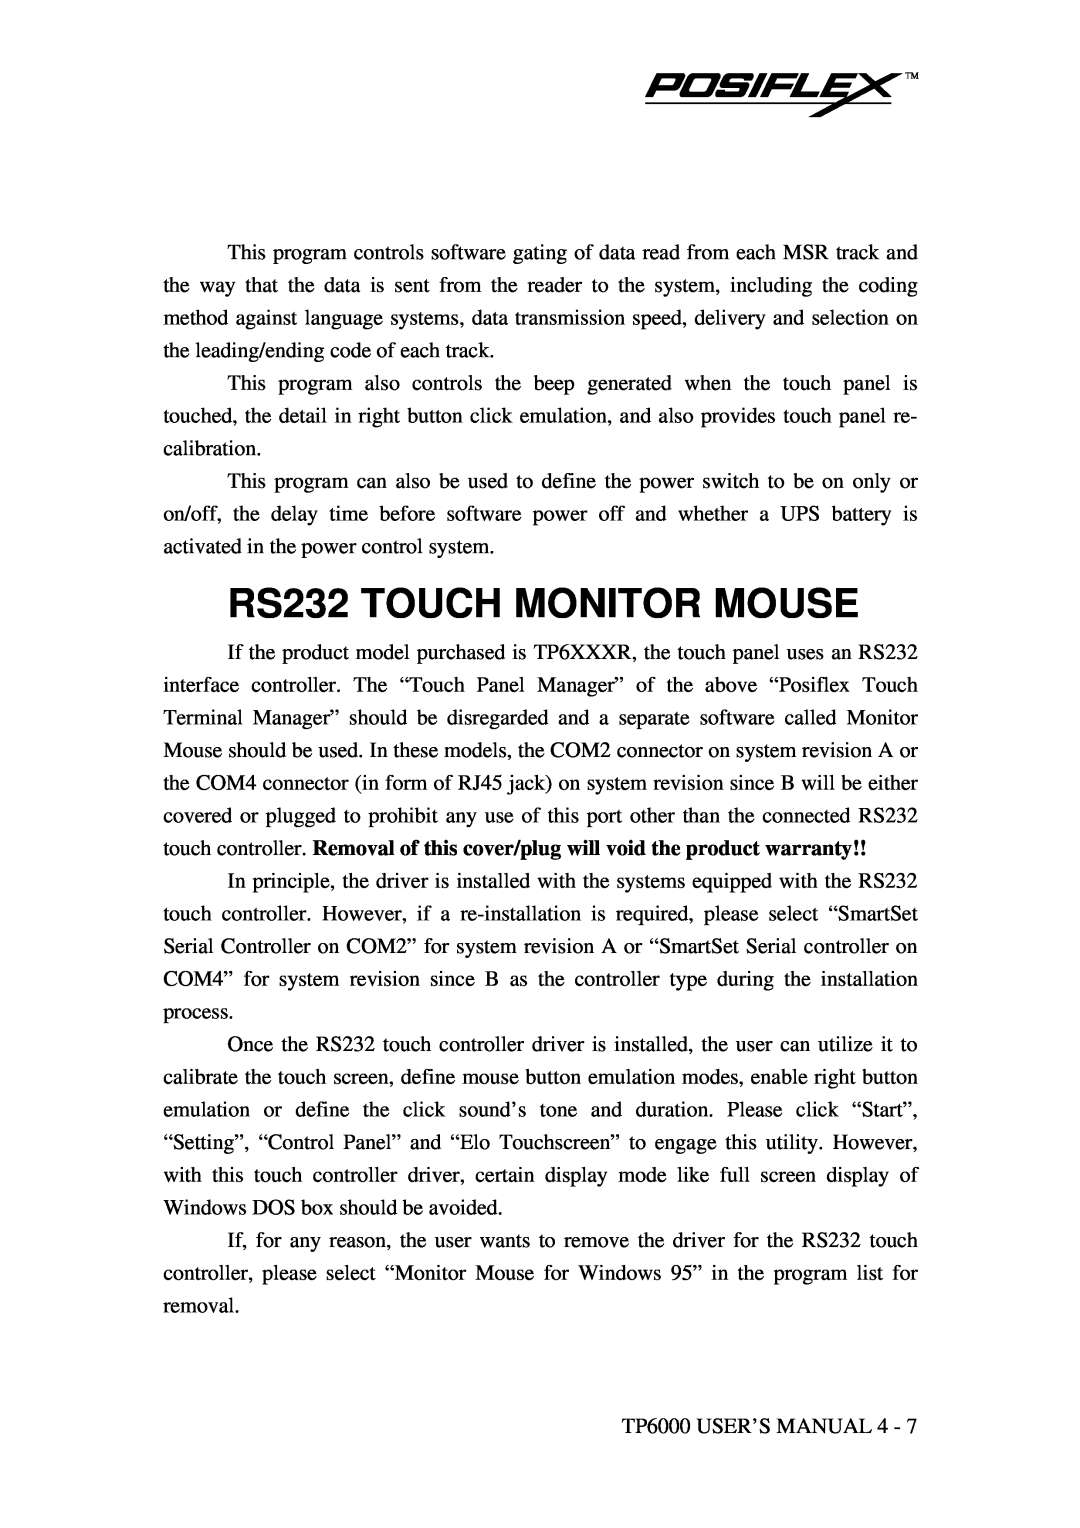 Mustek TP-6000 user manual RS232 TOUCH MONITOR MOUSE 